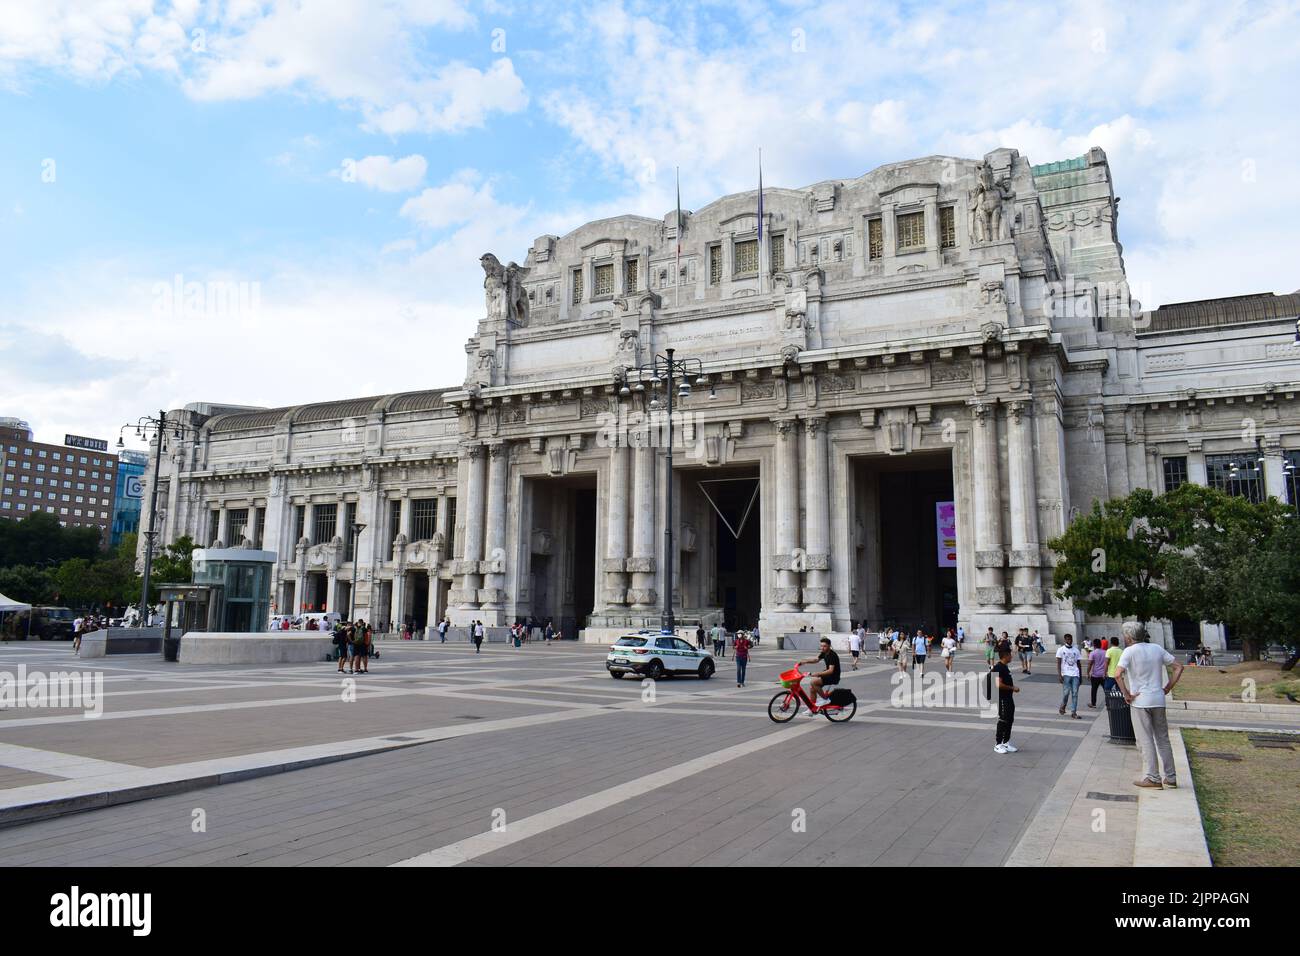 MILAN, ITALY - AUGUST 15, 2022: Historical main train or railway station, Milano Centrale, opened in 1931. Stock Photo